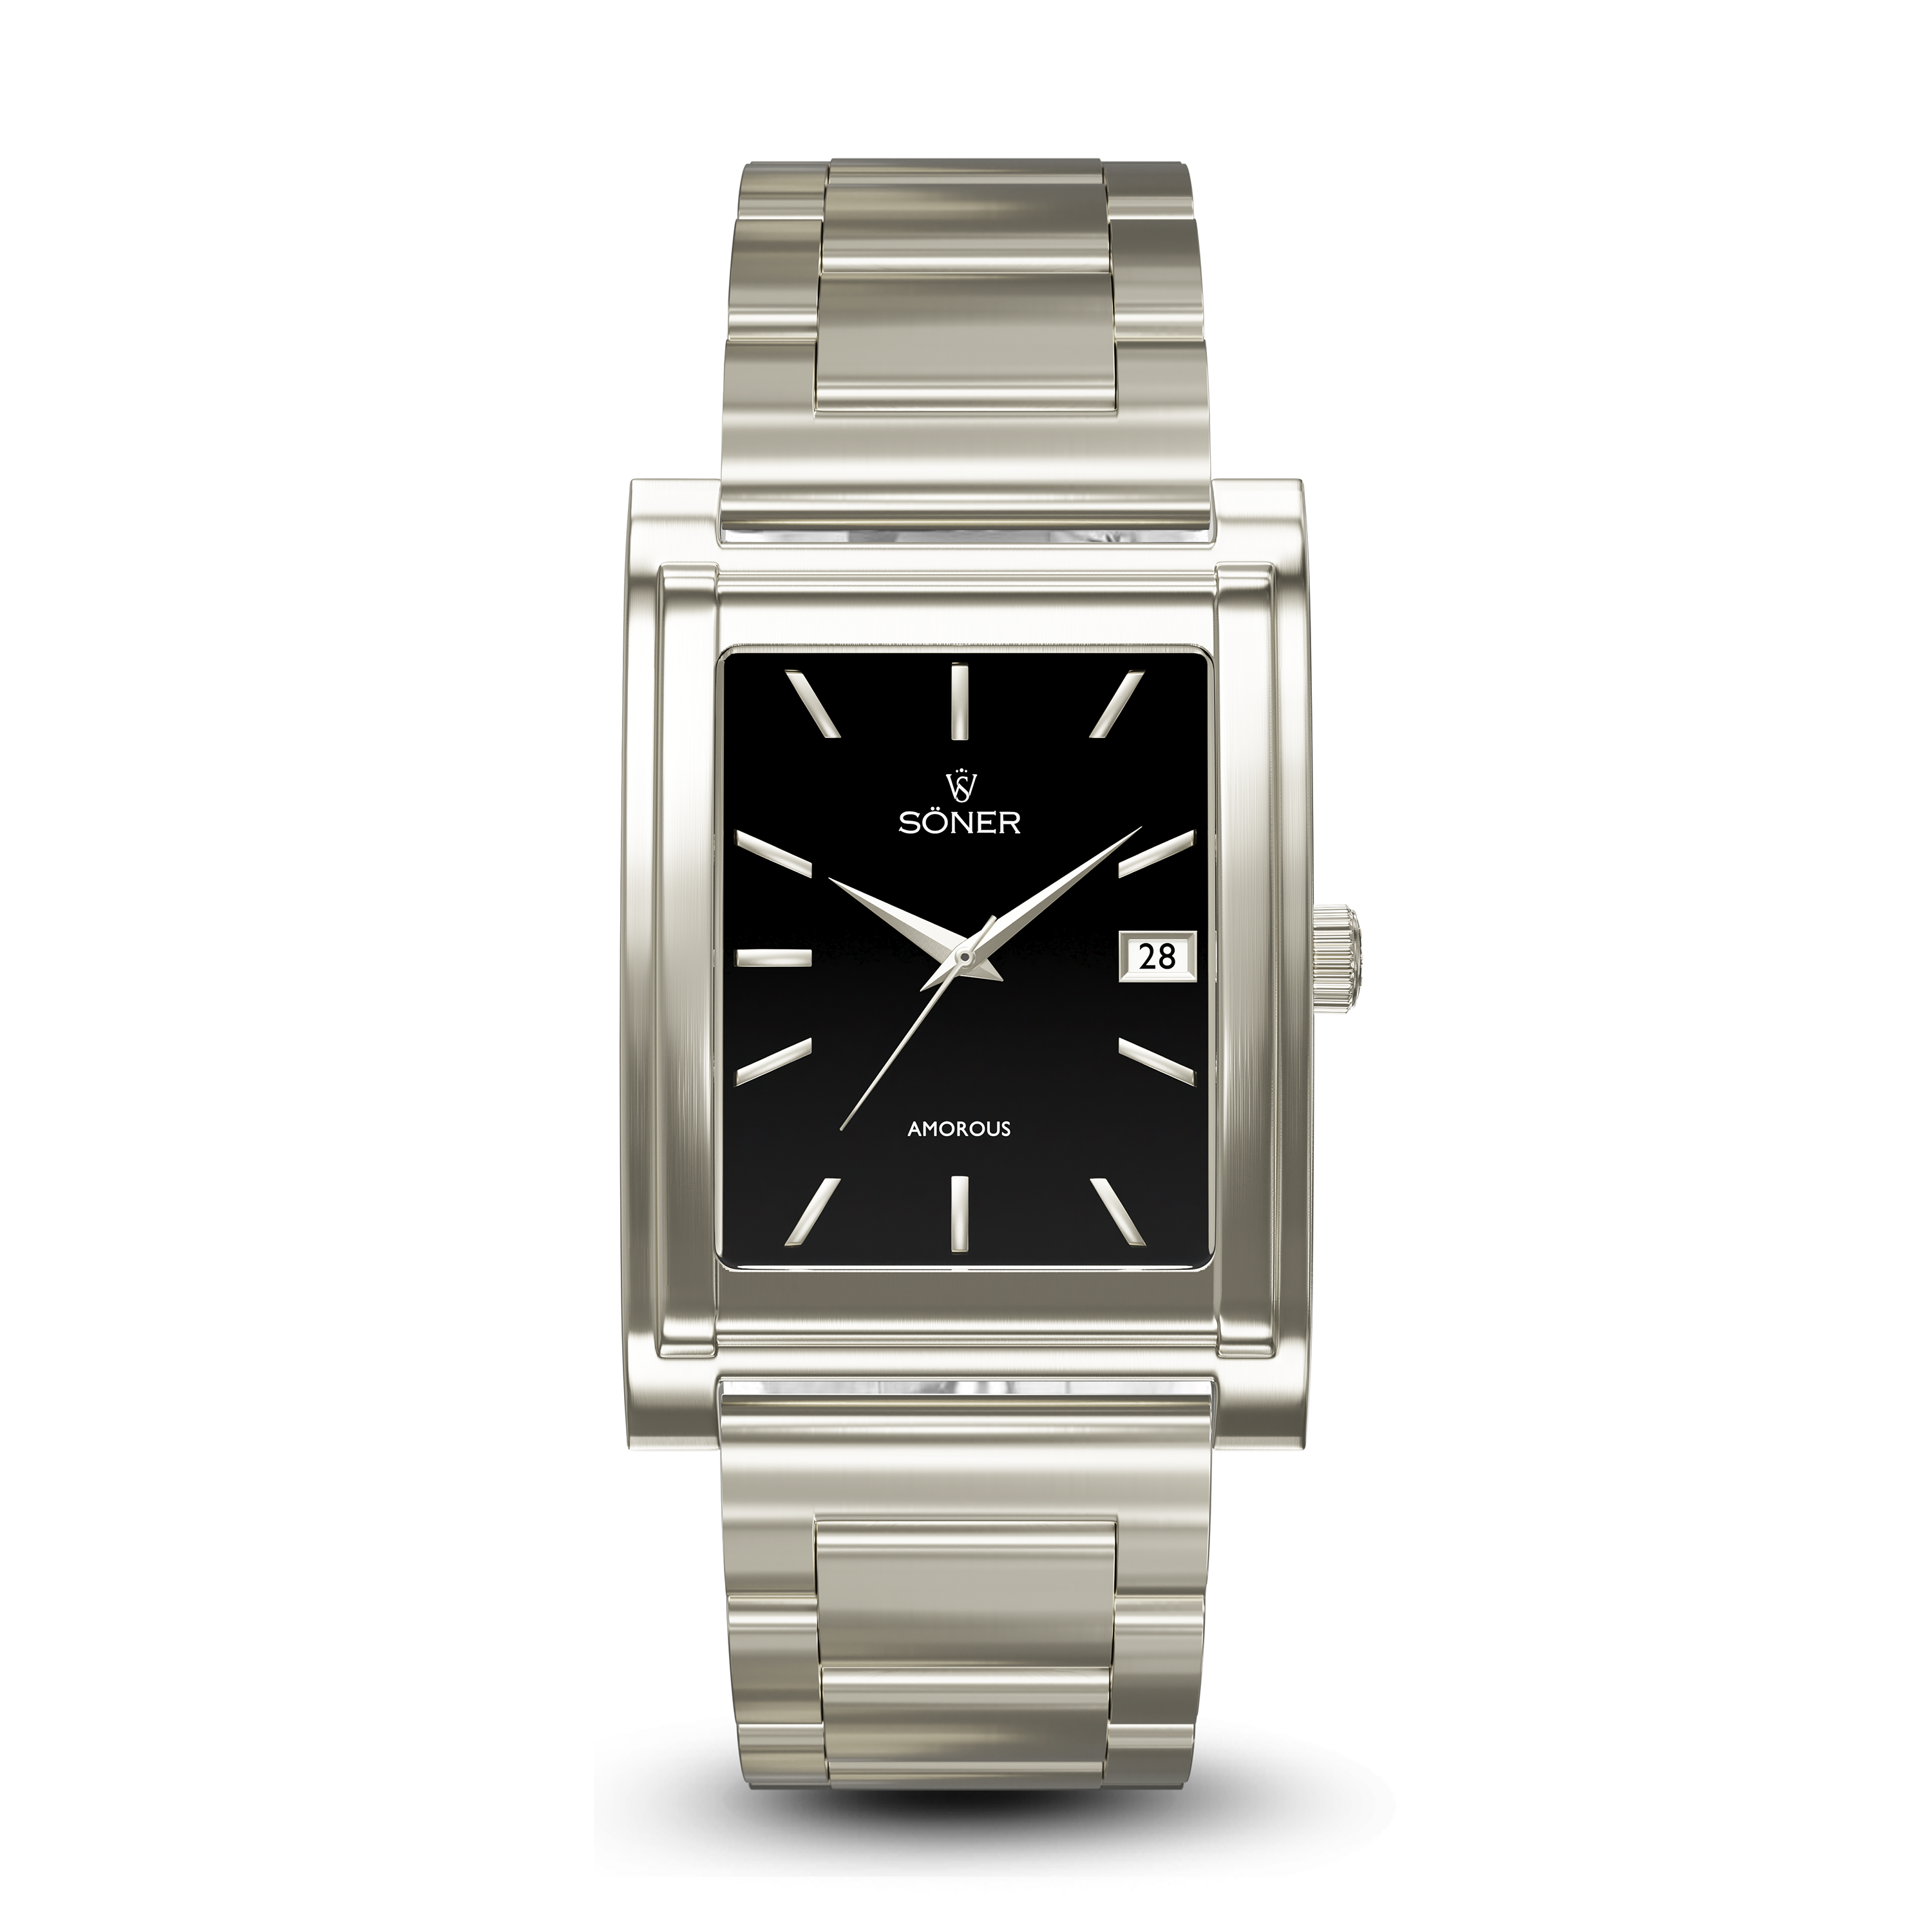 Square automatic watch, Amorous Sydney with black dial - steel bracelet front view